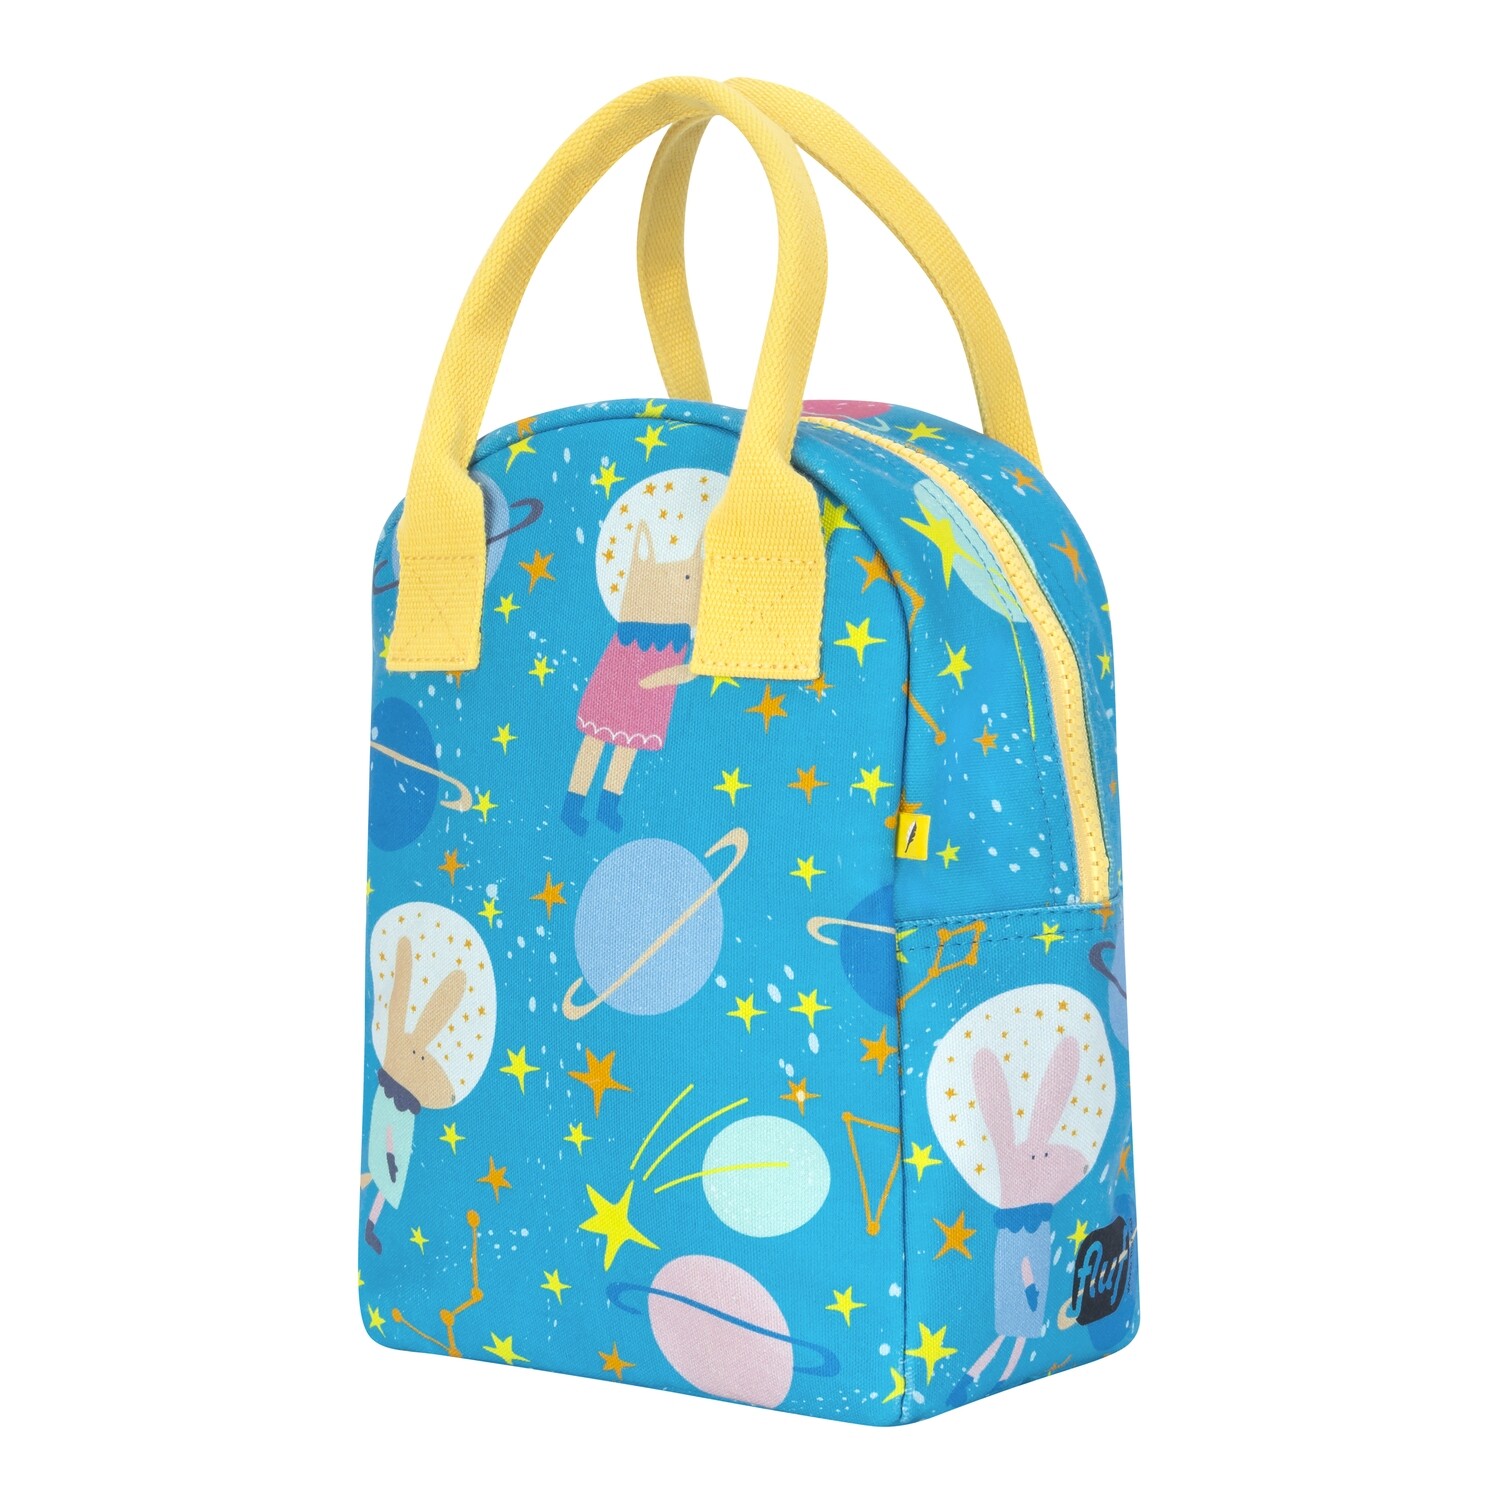 Zippy Lunch Bag, Astro Party